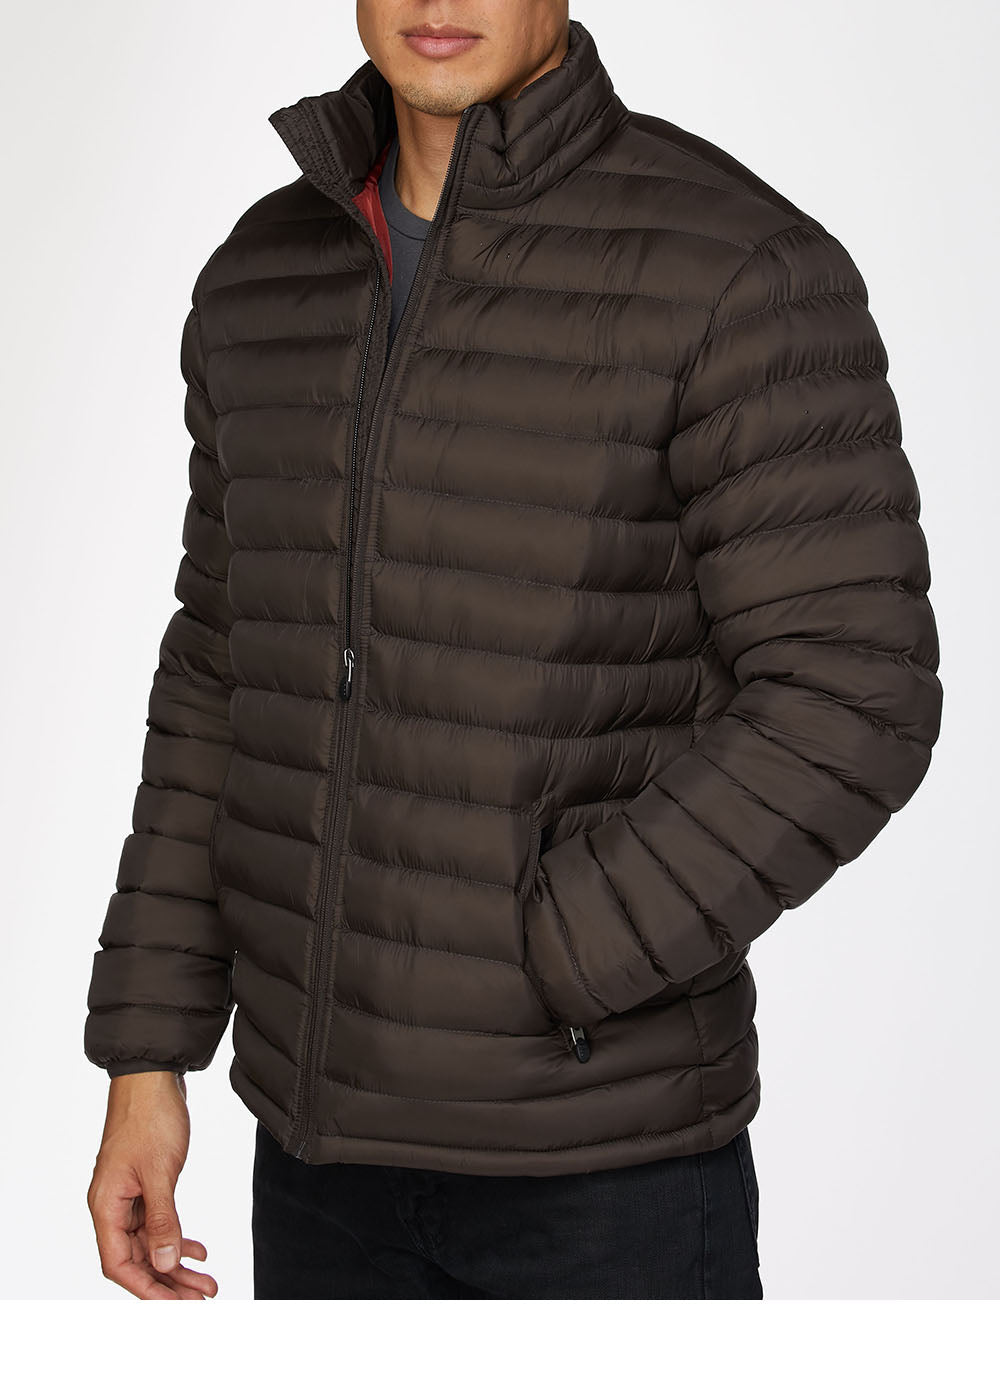 Men's Nylon Quilted Puffer Jacket -NJ640-Brown